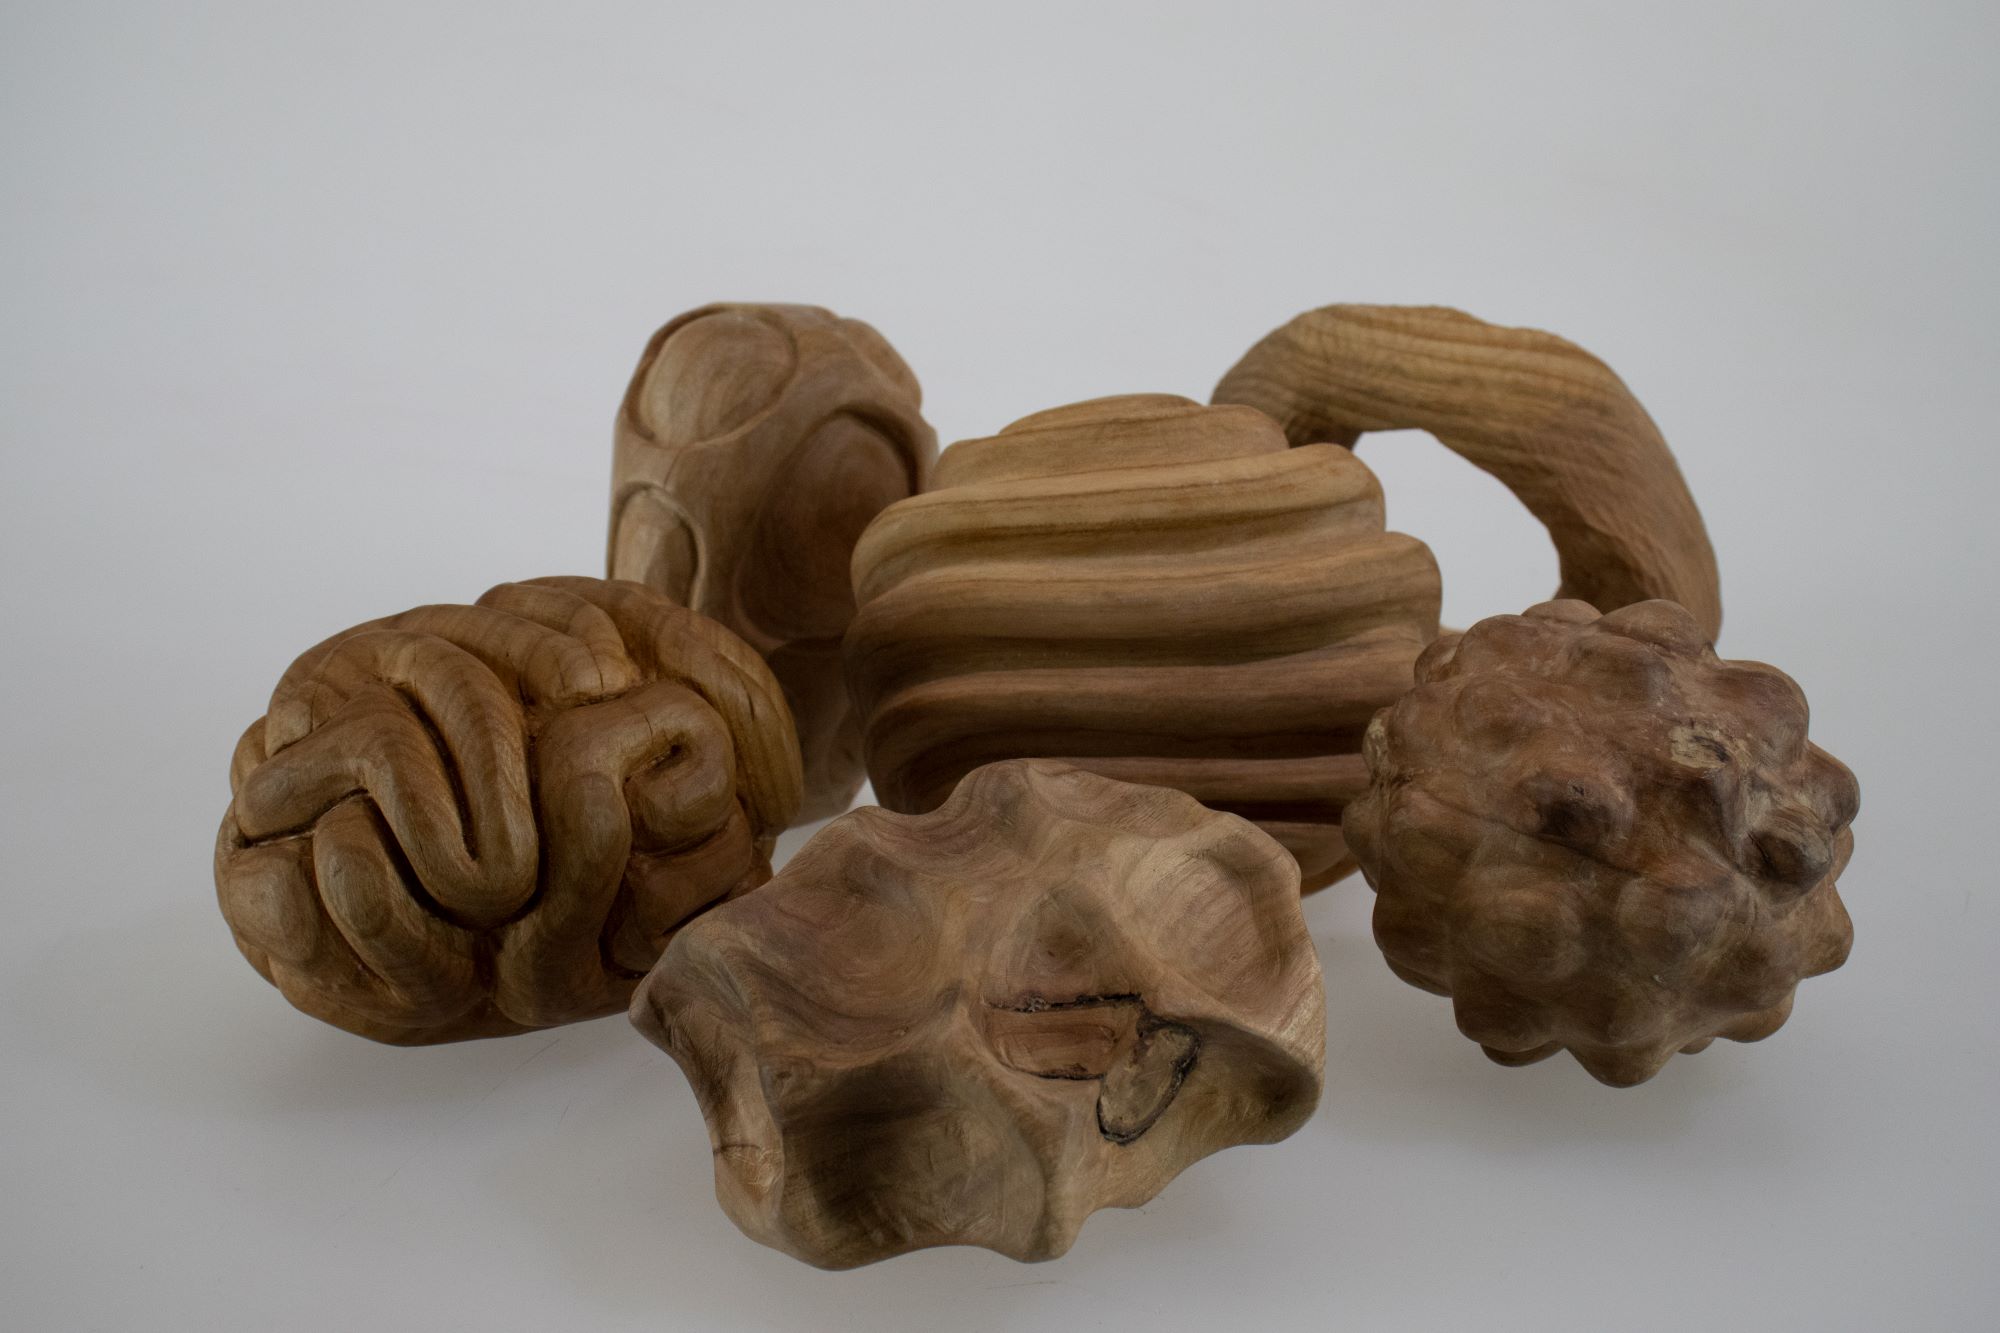 six abstract sculptural forms, carved from wood.